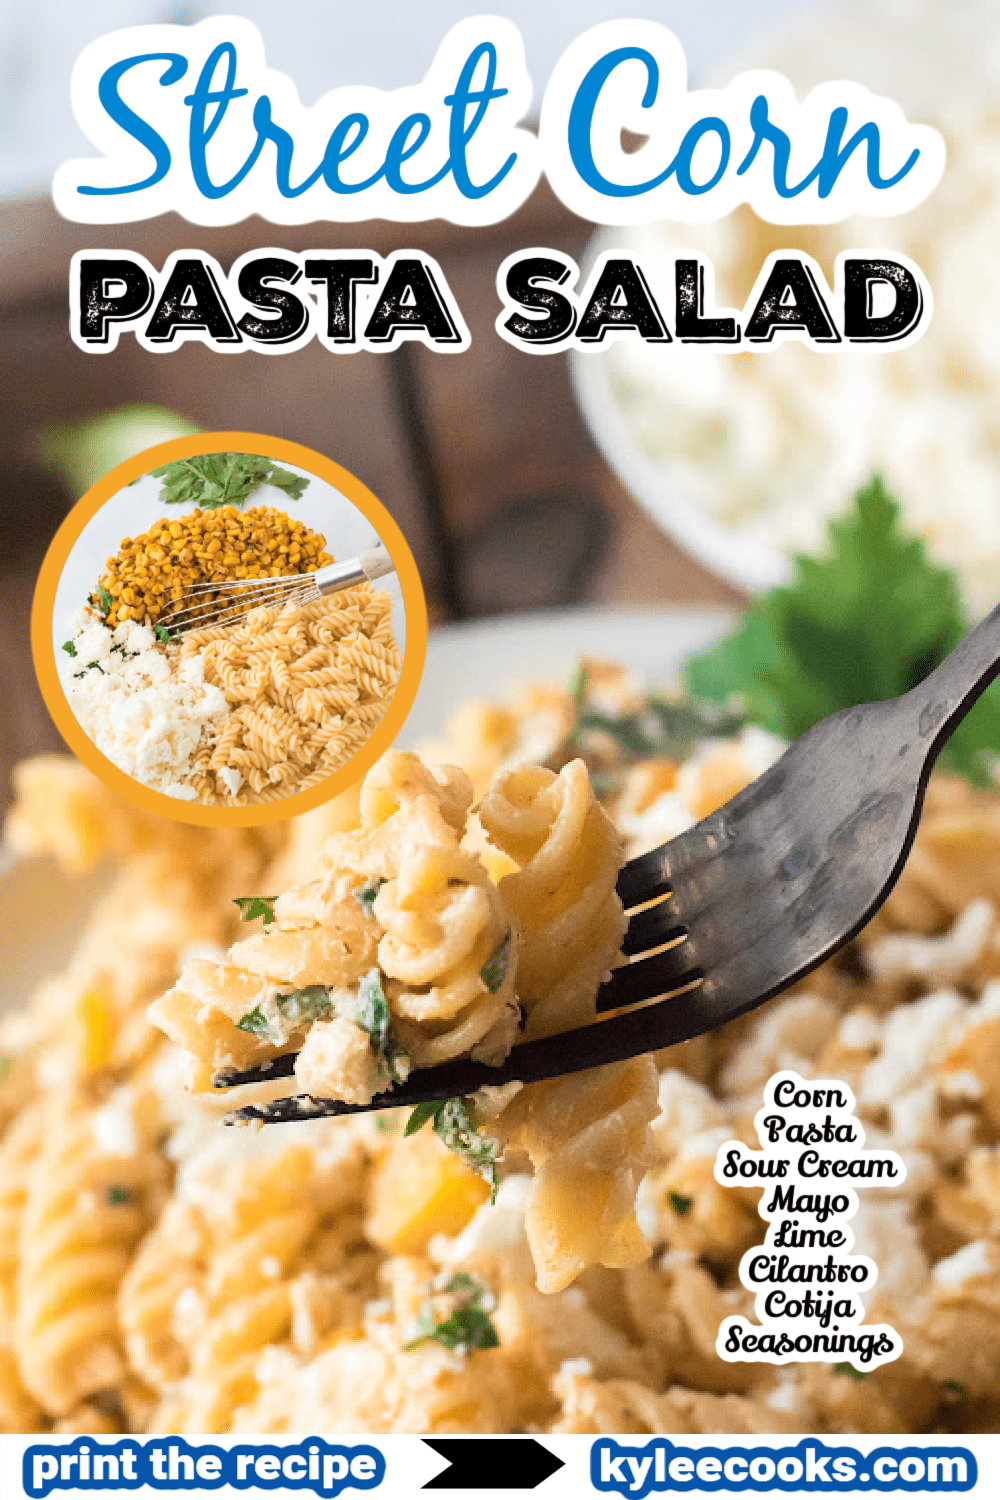 street corn pasta salad with ingredients overlaid in text